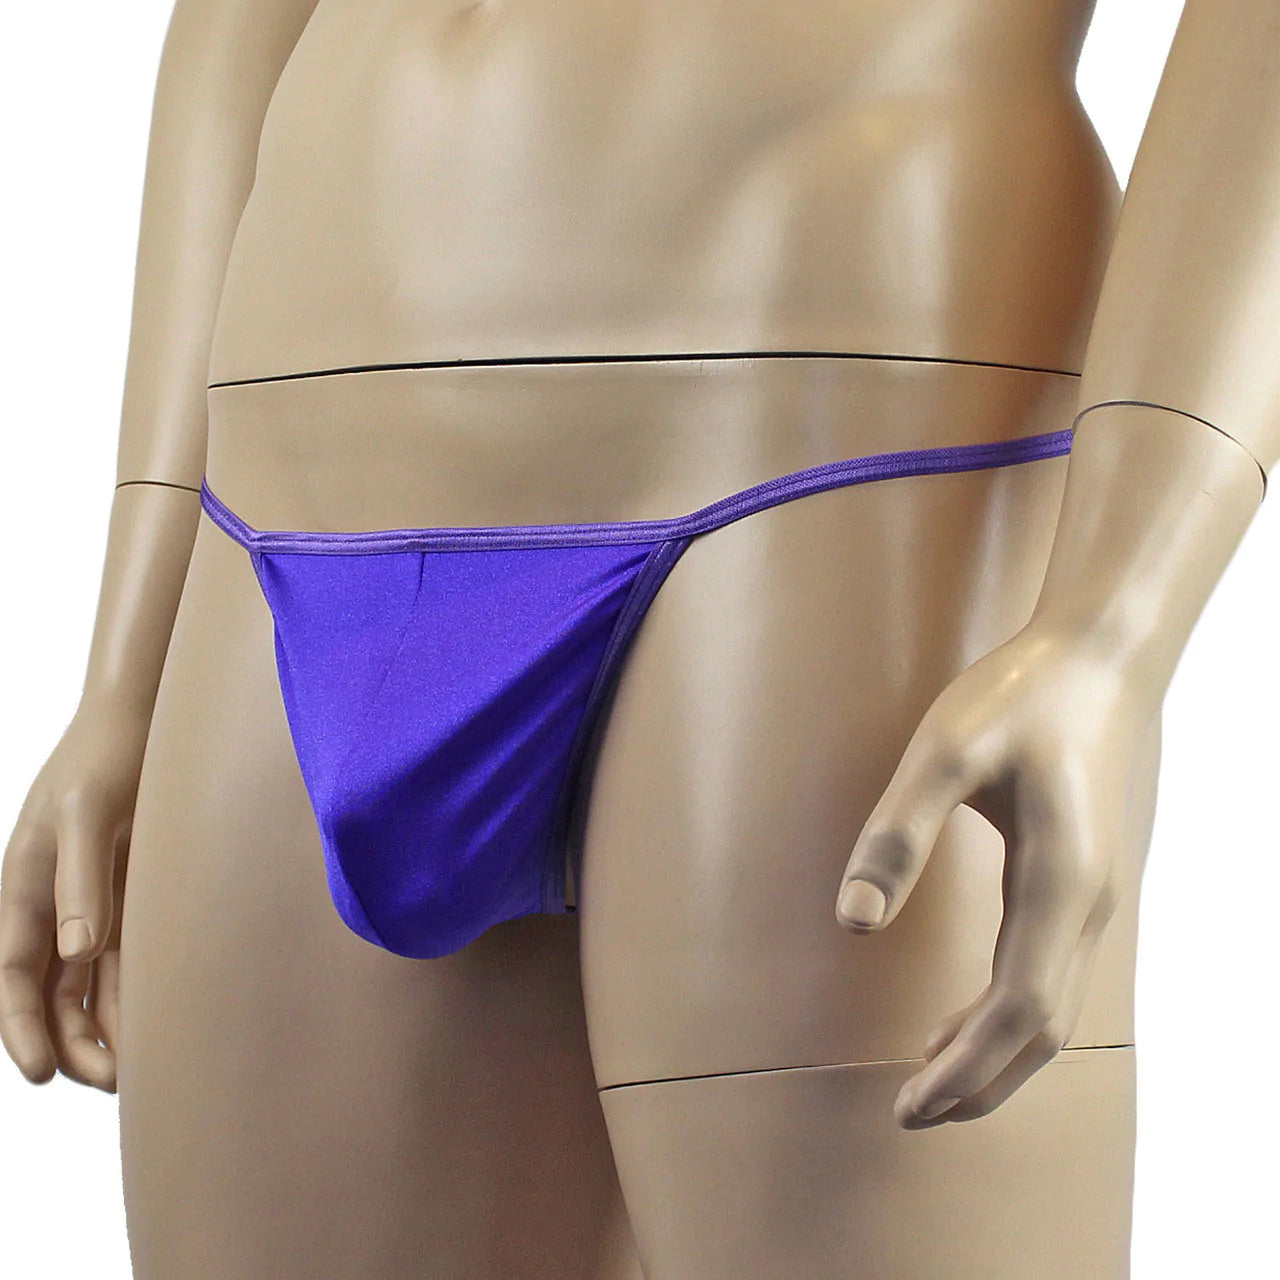 SALE - Mens Mick Keep It Simple Spandex Pouch G string with Thin Elastic Purple